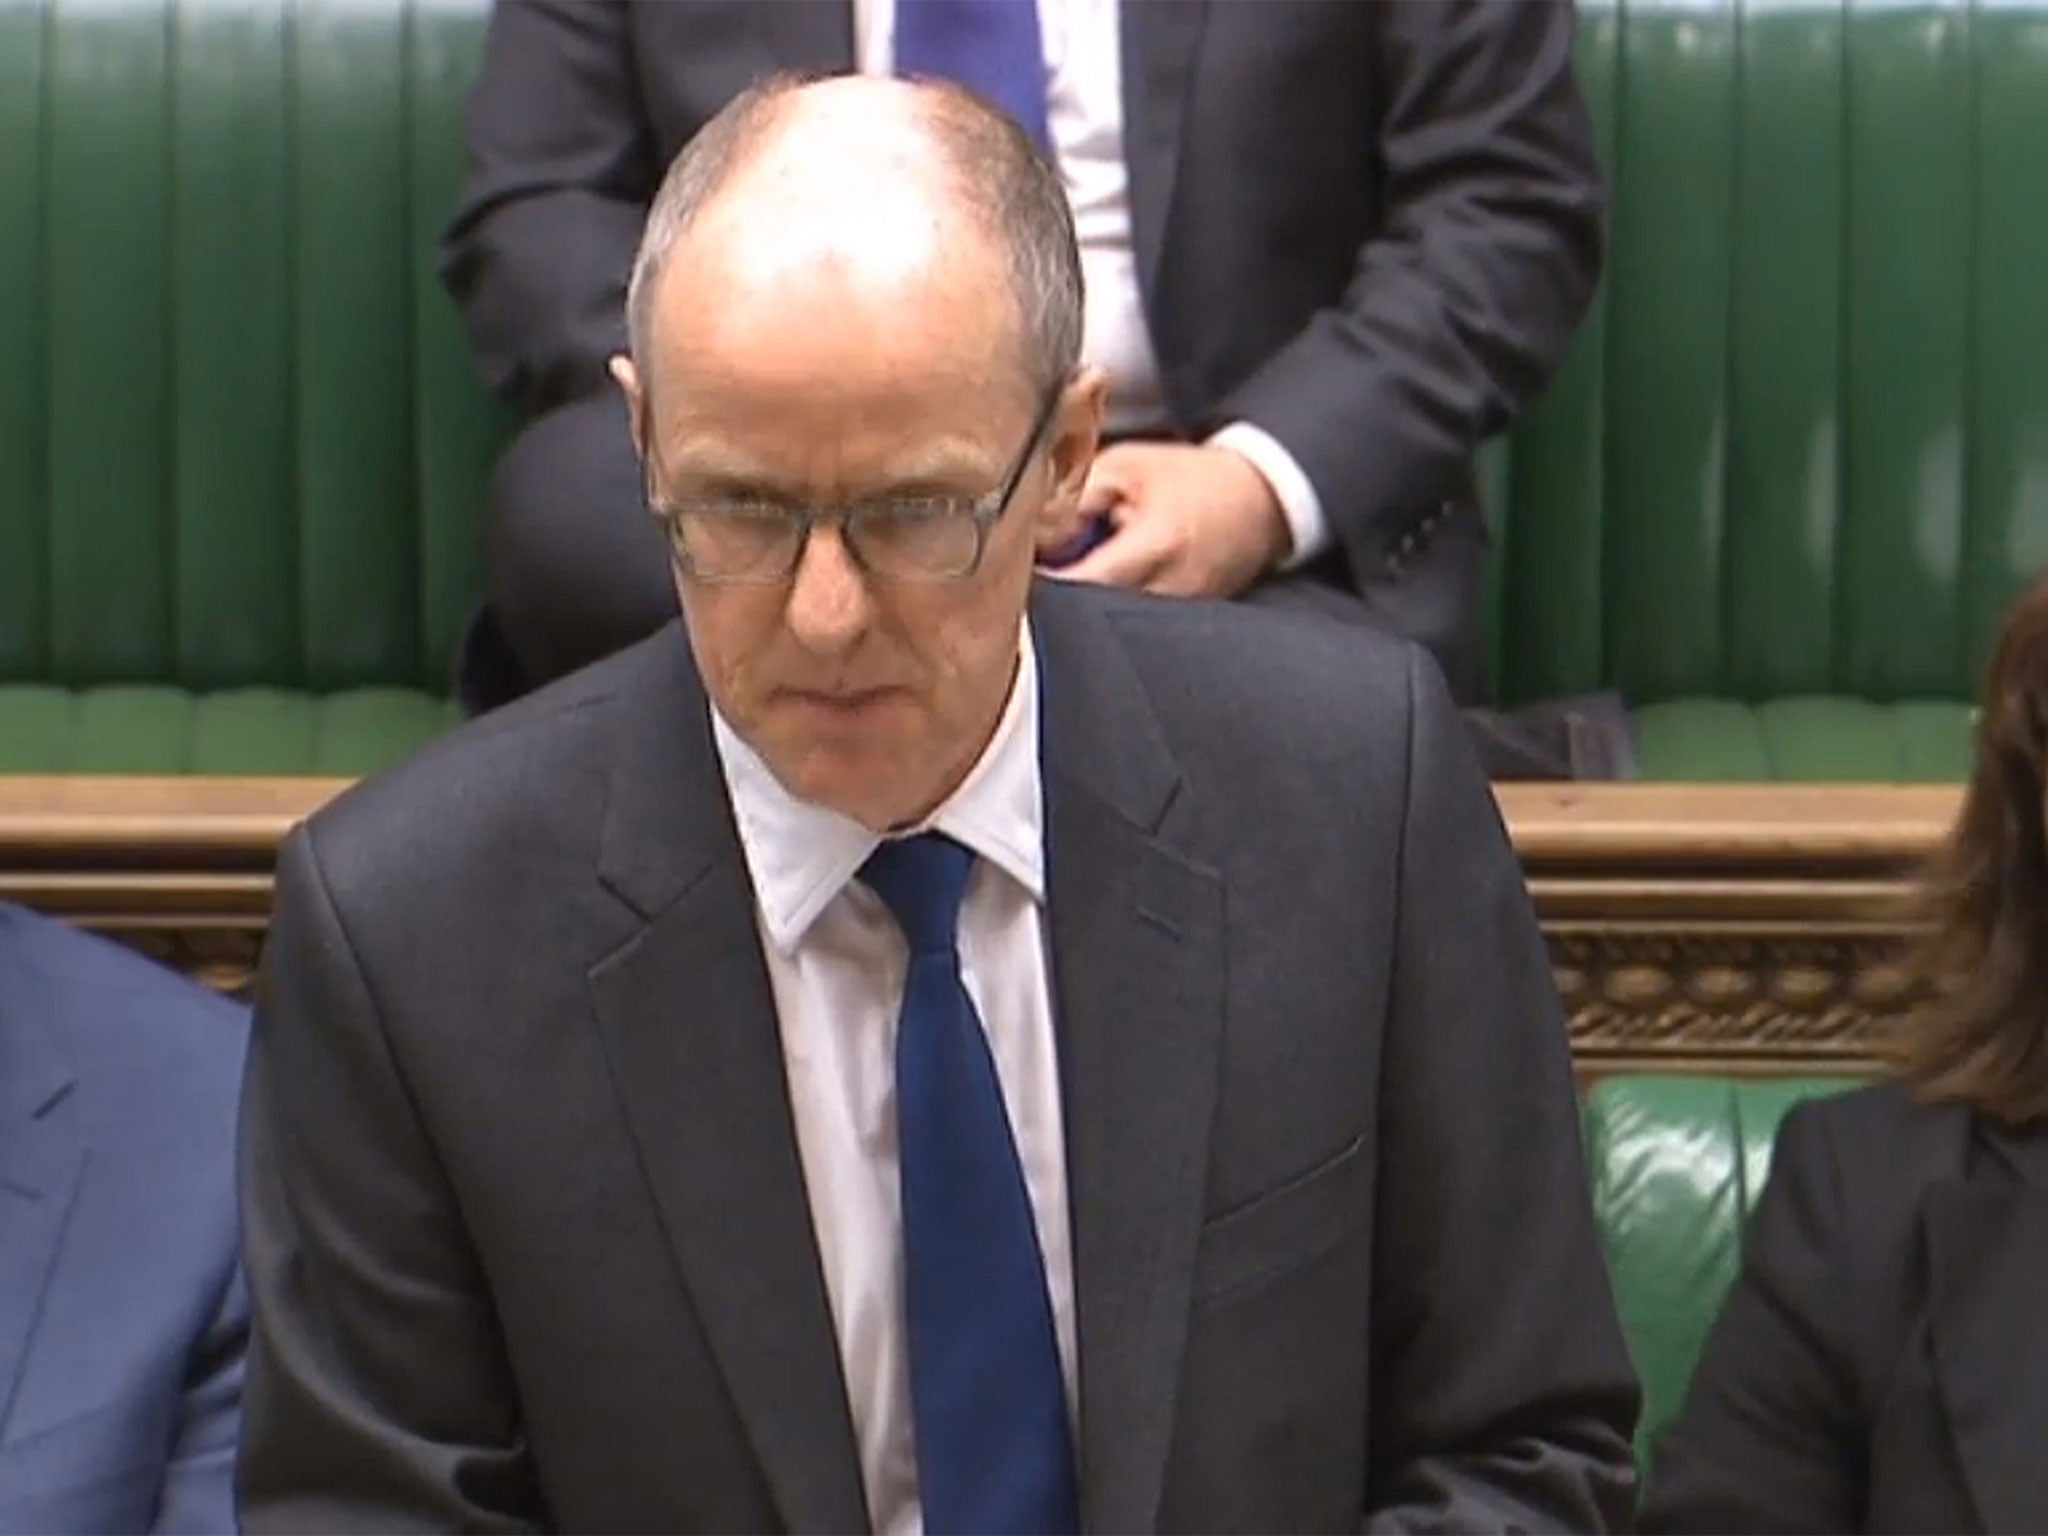 The Minister for Schools spoke in the Houses of Commons on Thursday regarding term-time holidays